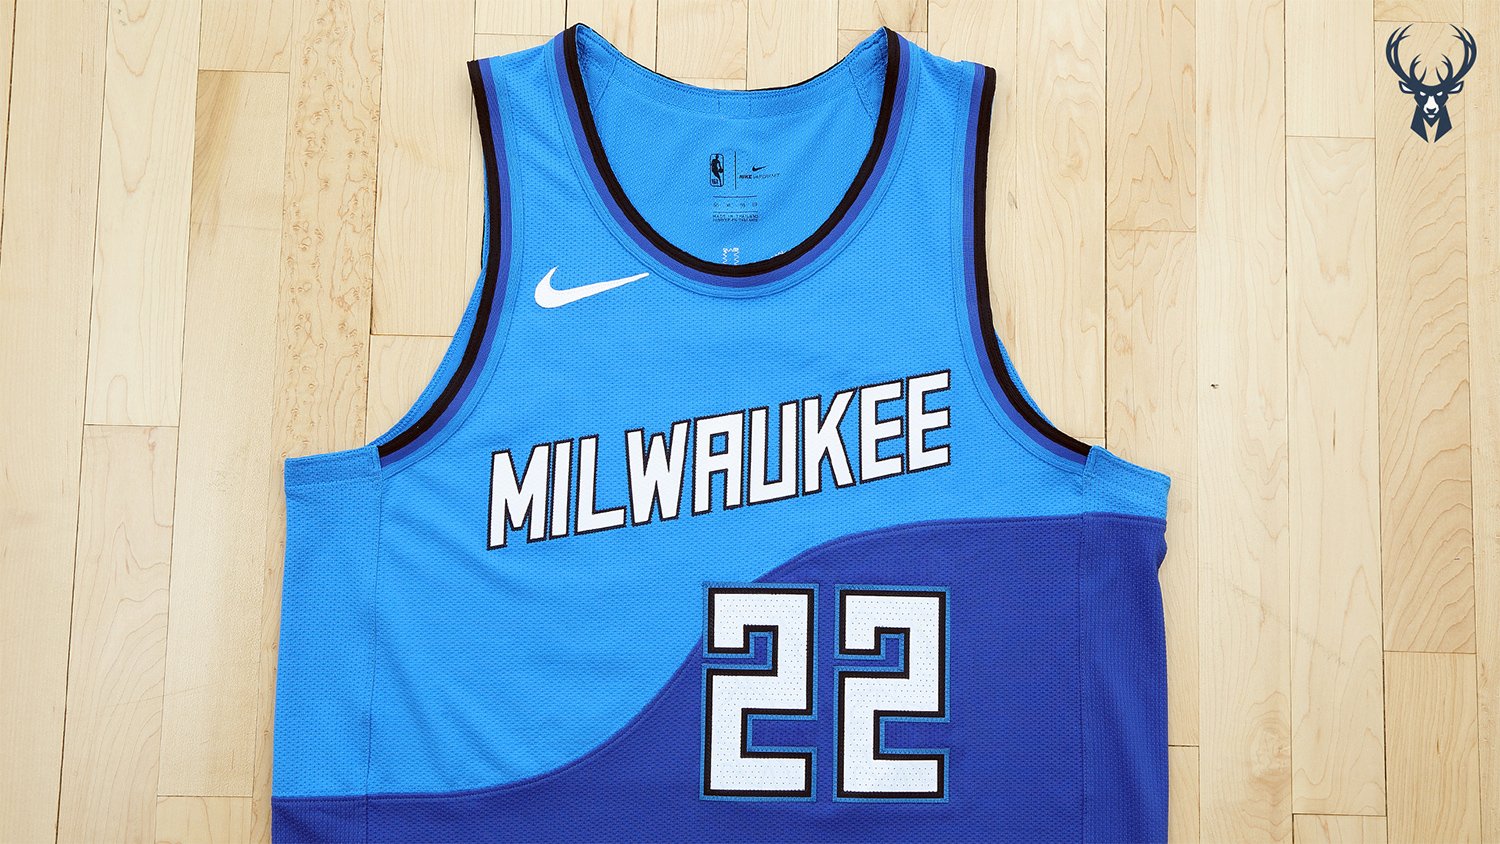 Here's the 202021 Milwaukee Bucks City Edition uniform, which is Great Lakes Blue